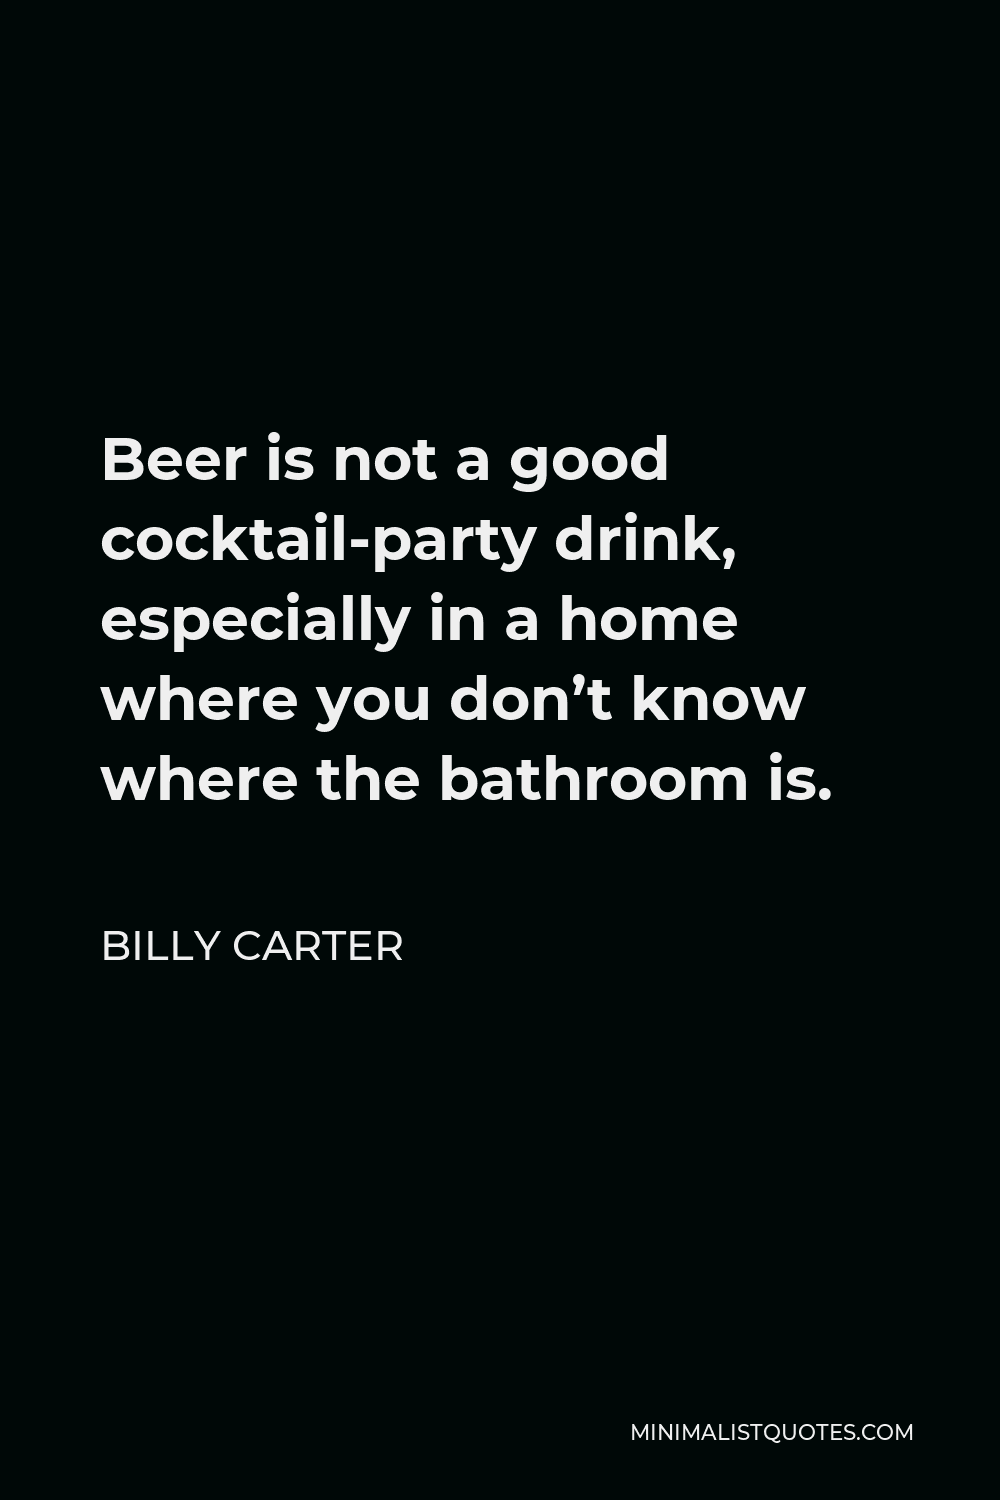 Billy Carter Quote - Beer is not a good cocktail-party drink, especially in a home where you don’t know where the bathroom is.